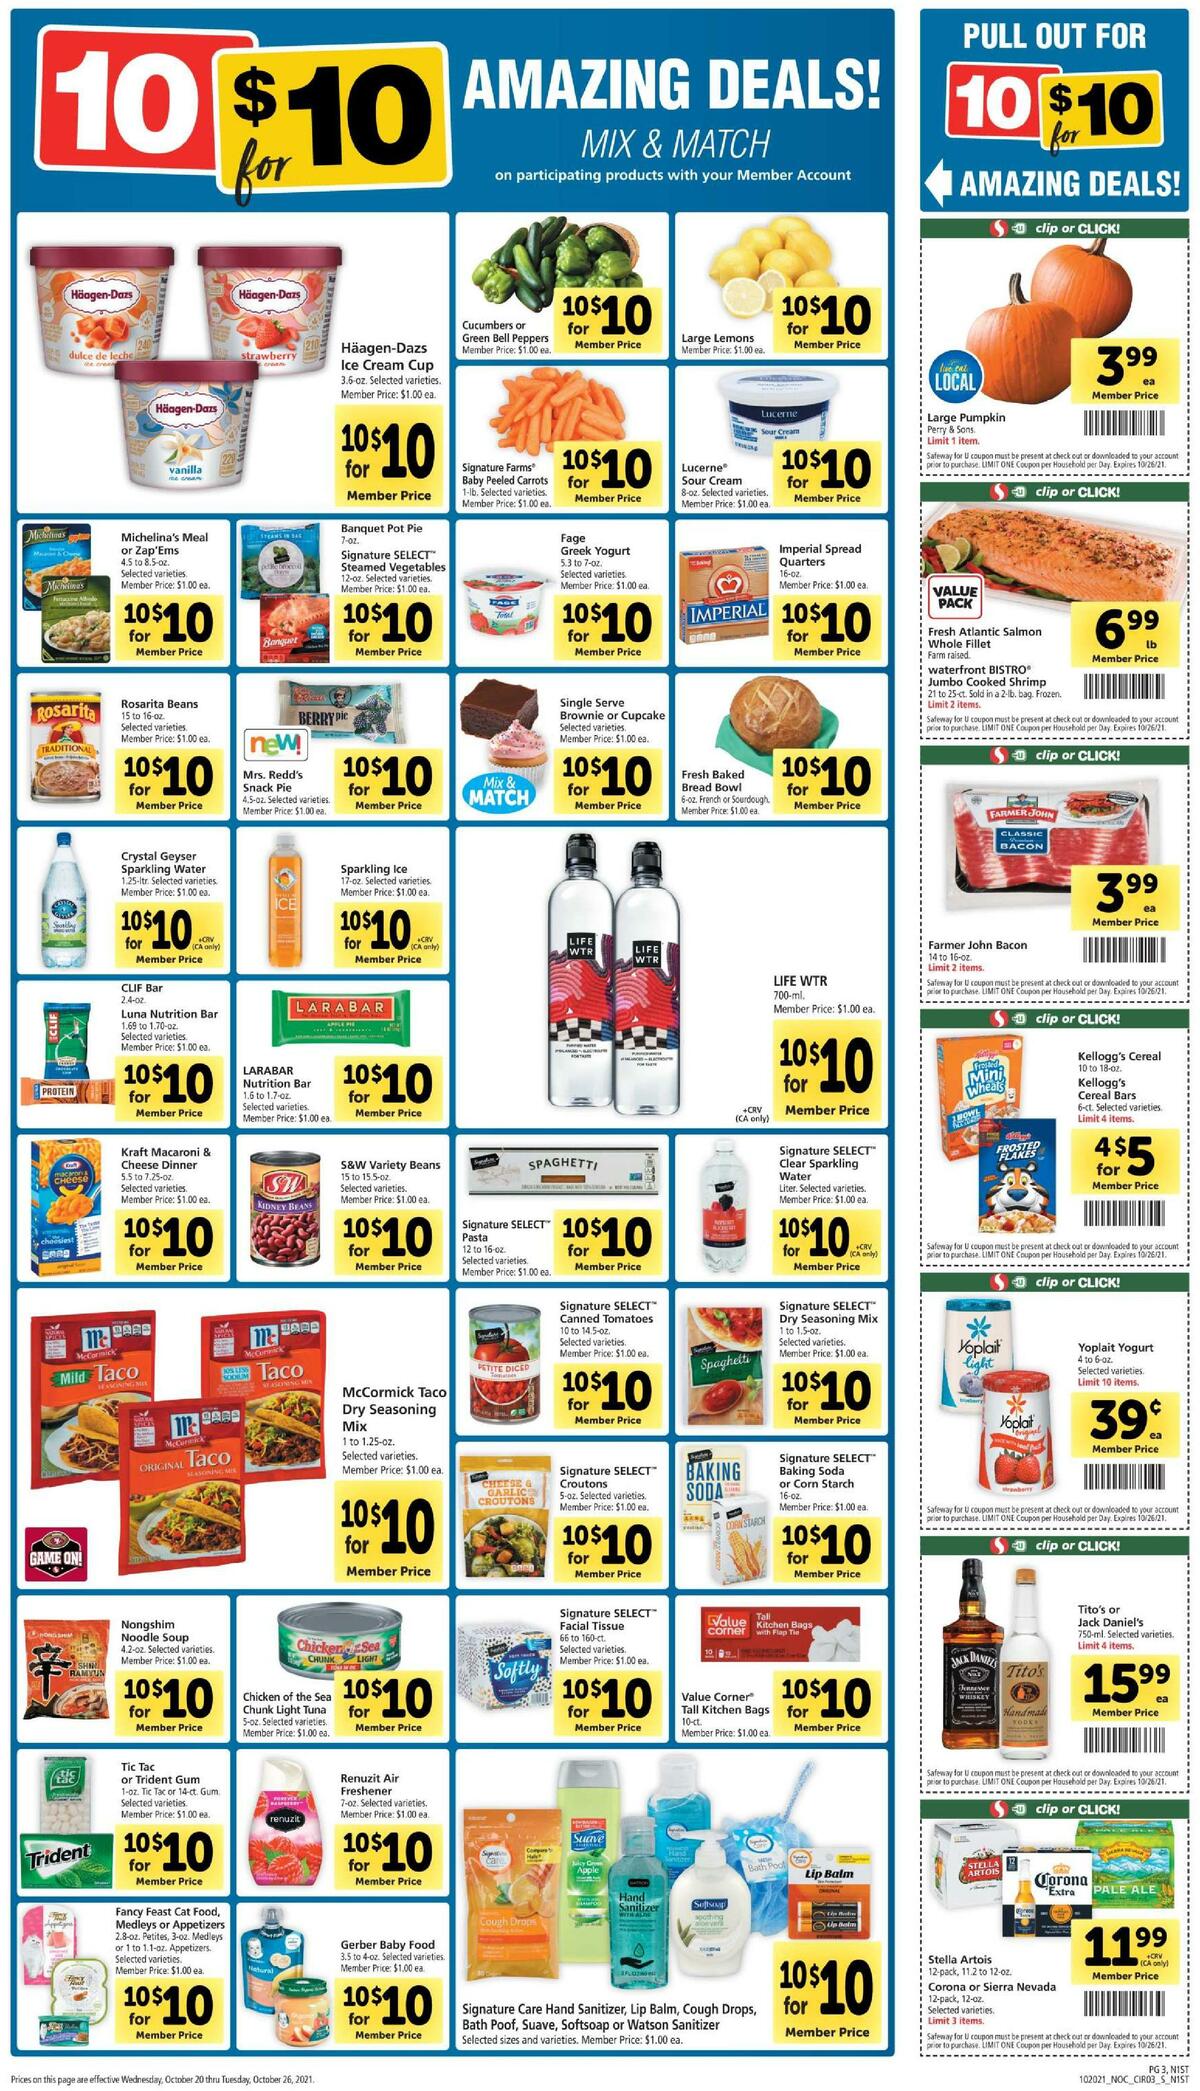 Safeway Weekly Ad from October 20